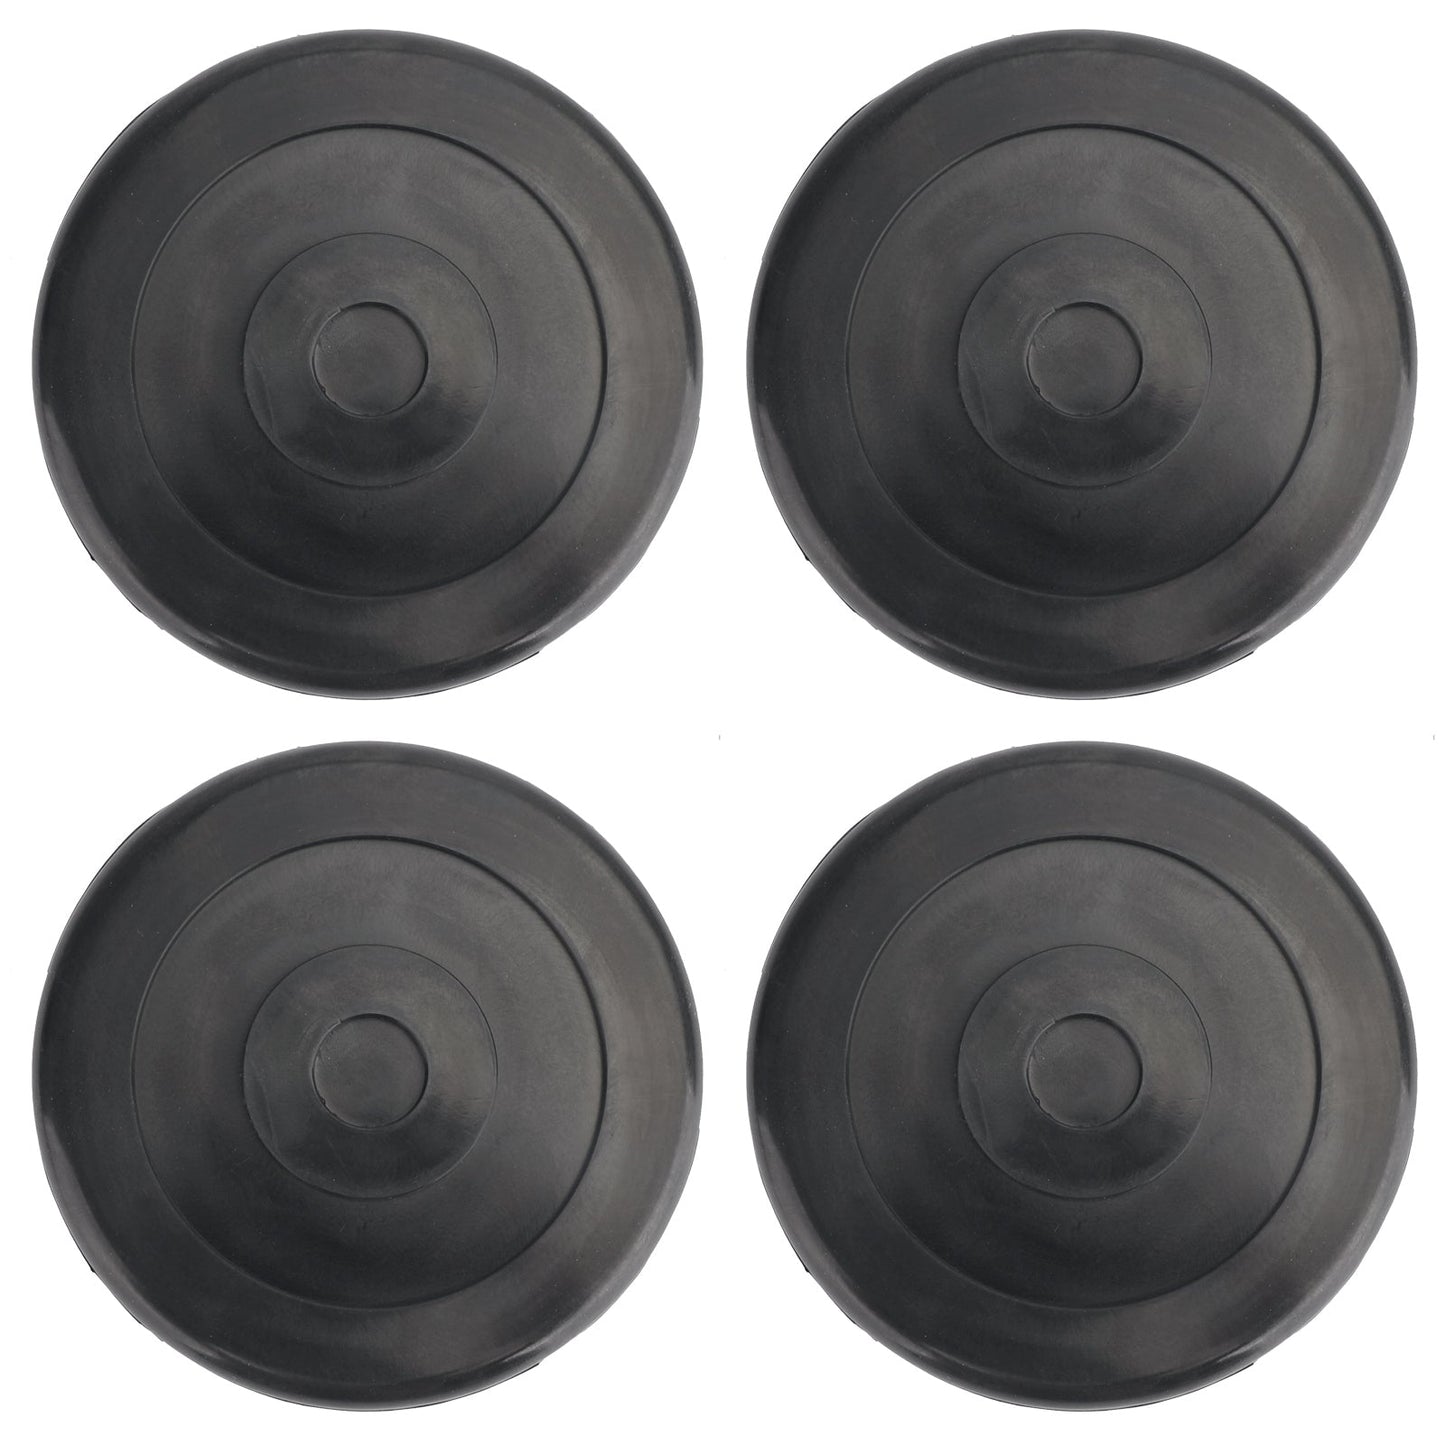 Rubber Arm Pads Fit For Benpak lifts and Danmar lifts BLK